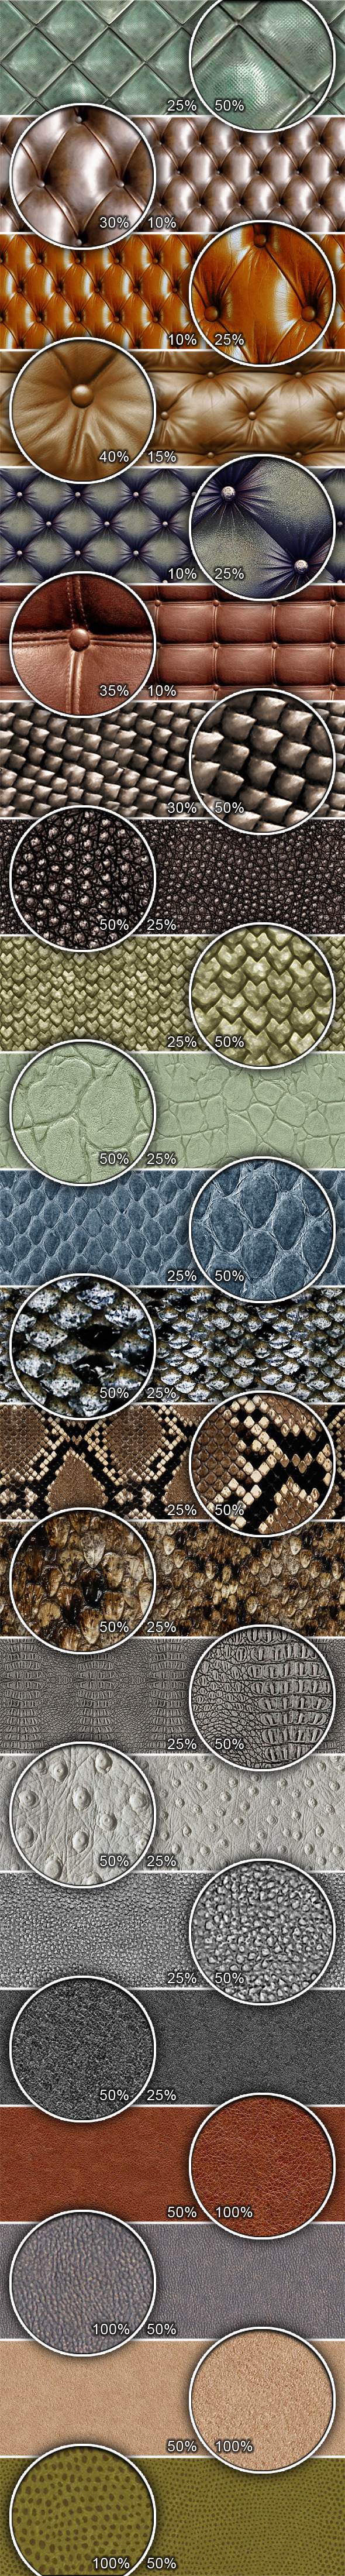 Leather and Skins Tileable Patterns